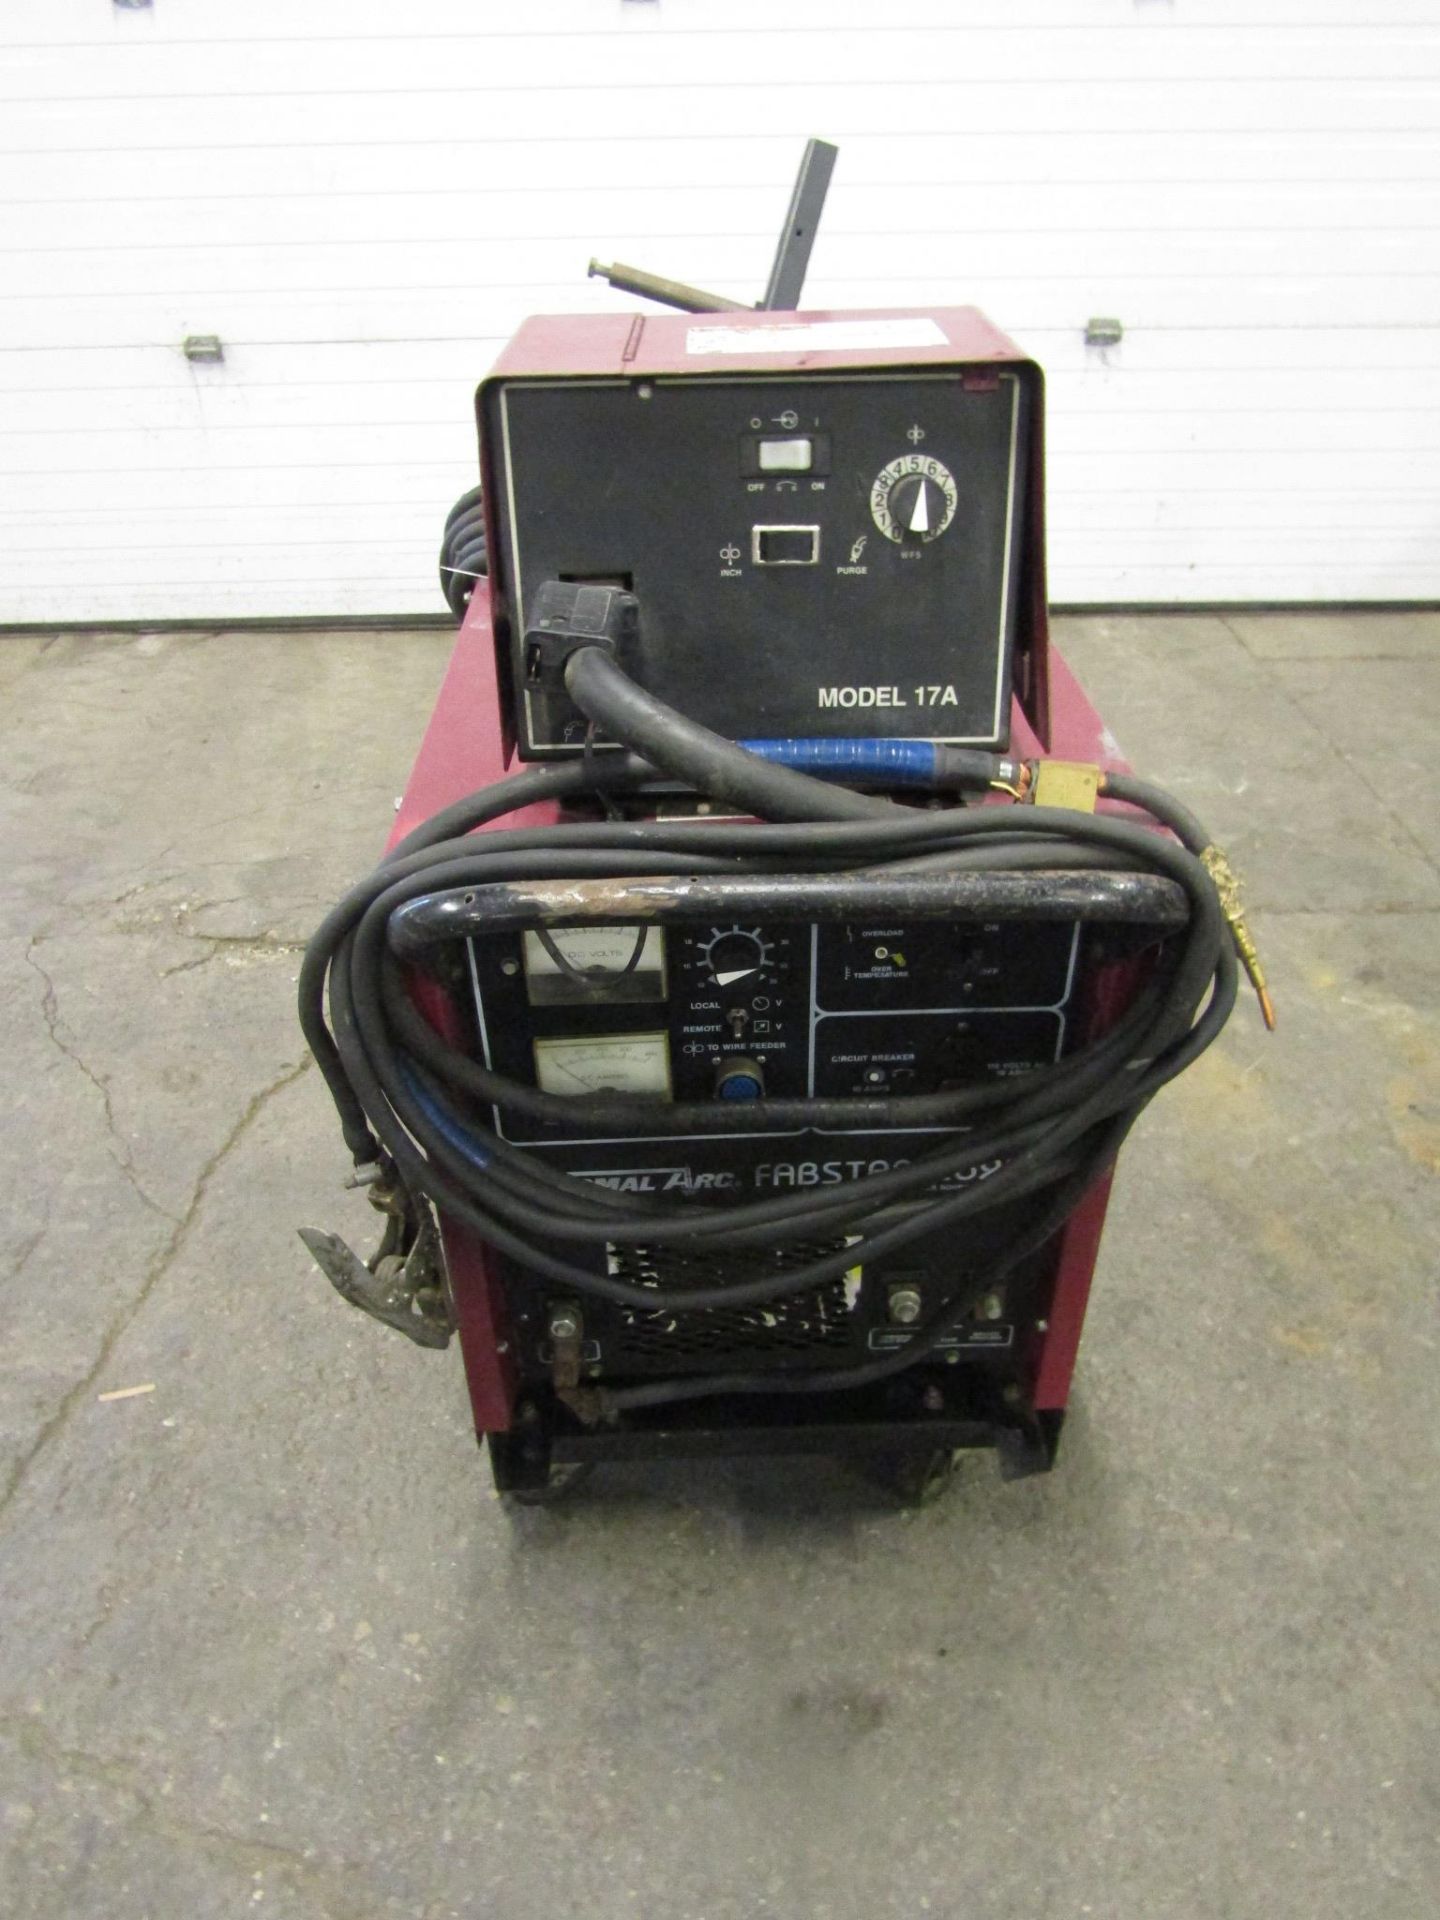 Thermal Arc Fabstar 2620 Mig welder with 17A Welding wire feeder and mig gun - 230/460/575V 3 - Image 2 of 2